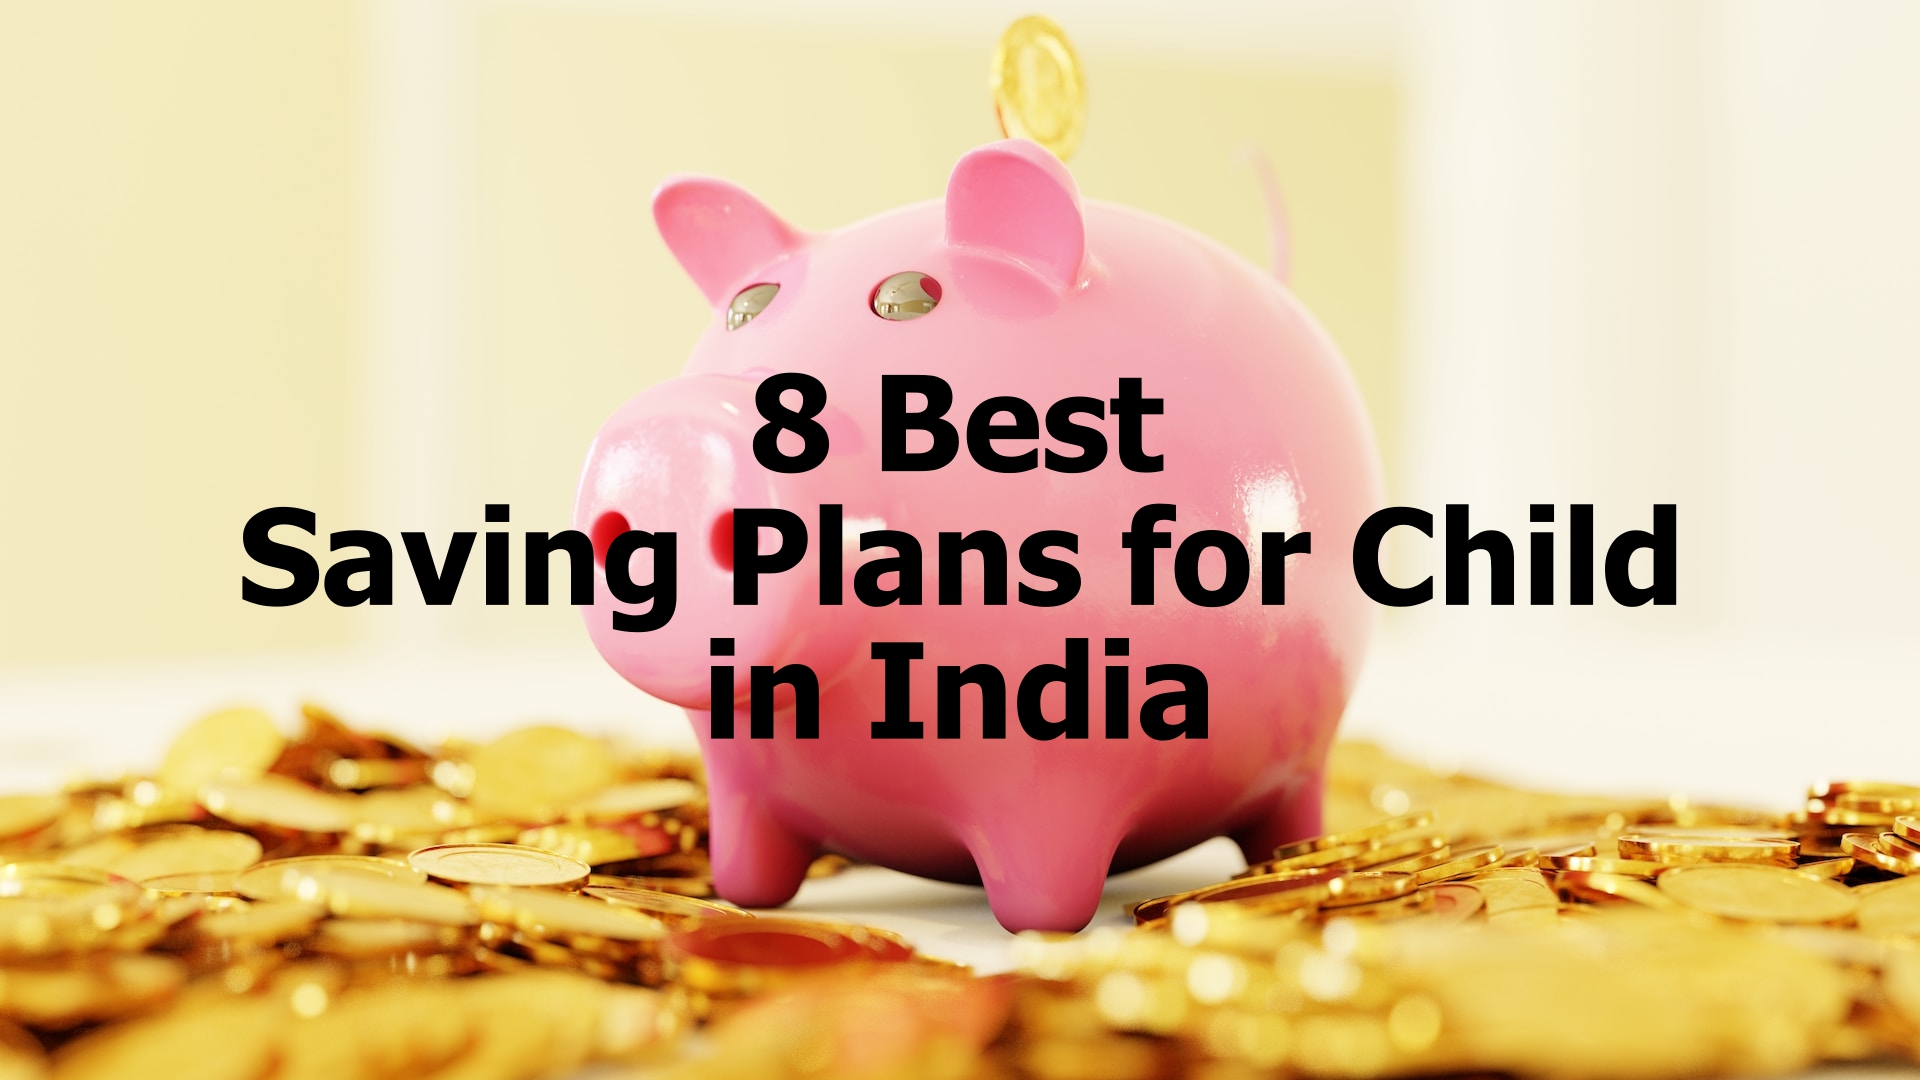 Best Saving Plans for Child in India